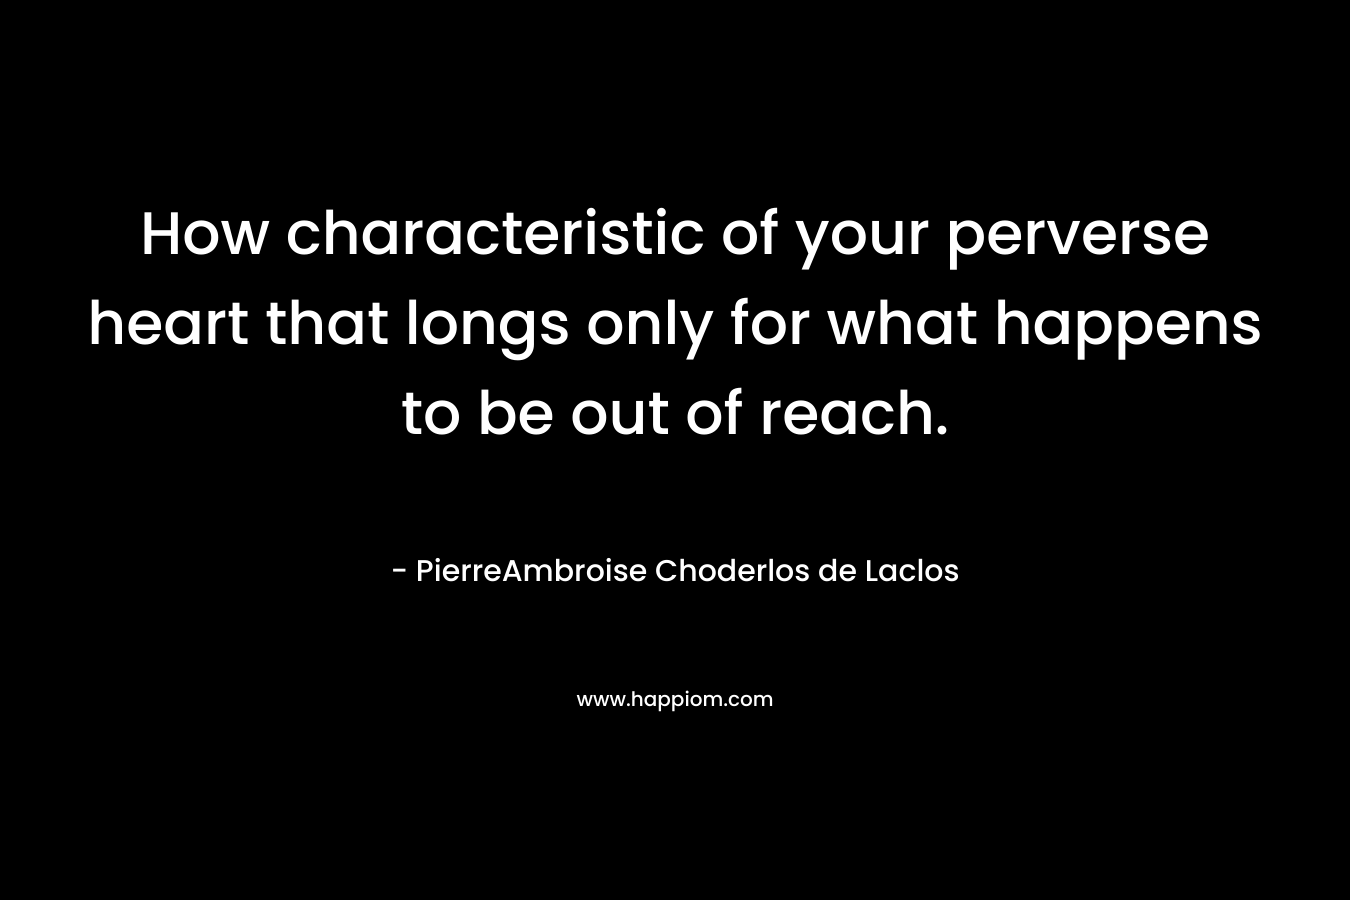 How characteristic of your perverse heart that longs only for what happens to be out of reach. – PierreAmbroise Choderlos de Laclos